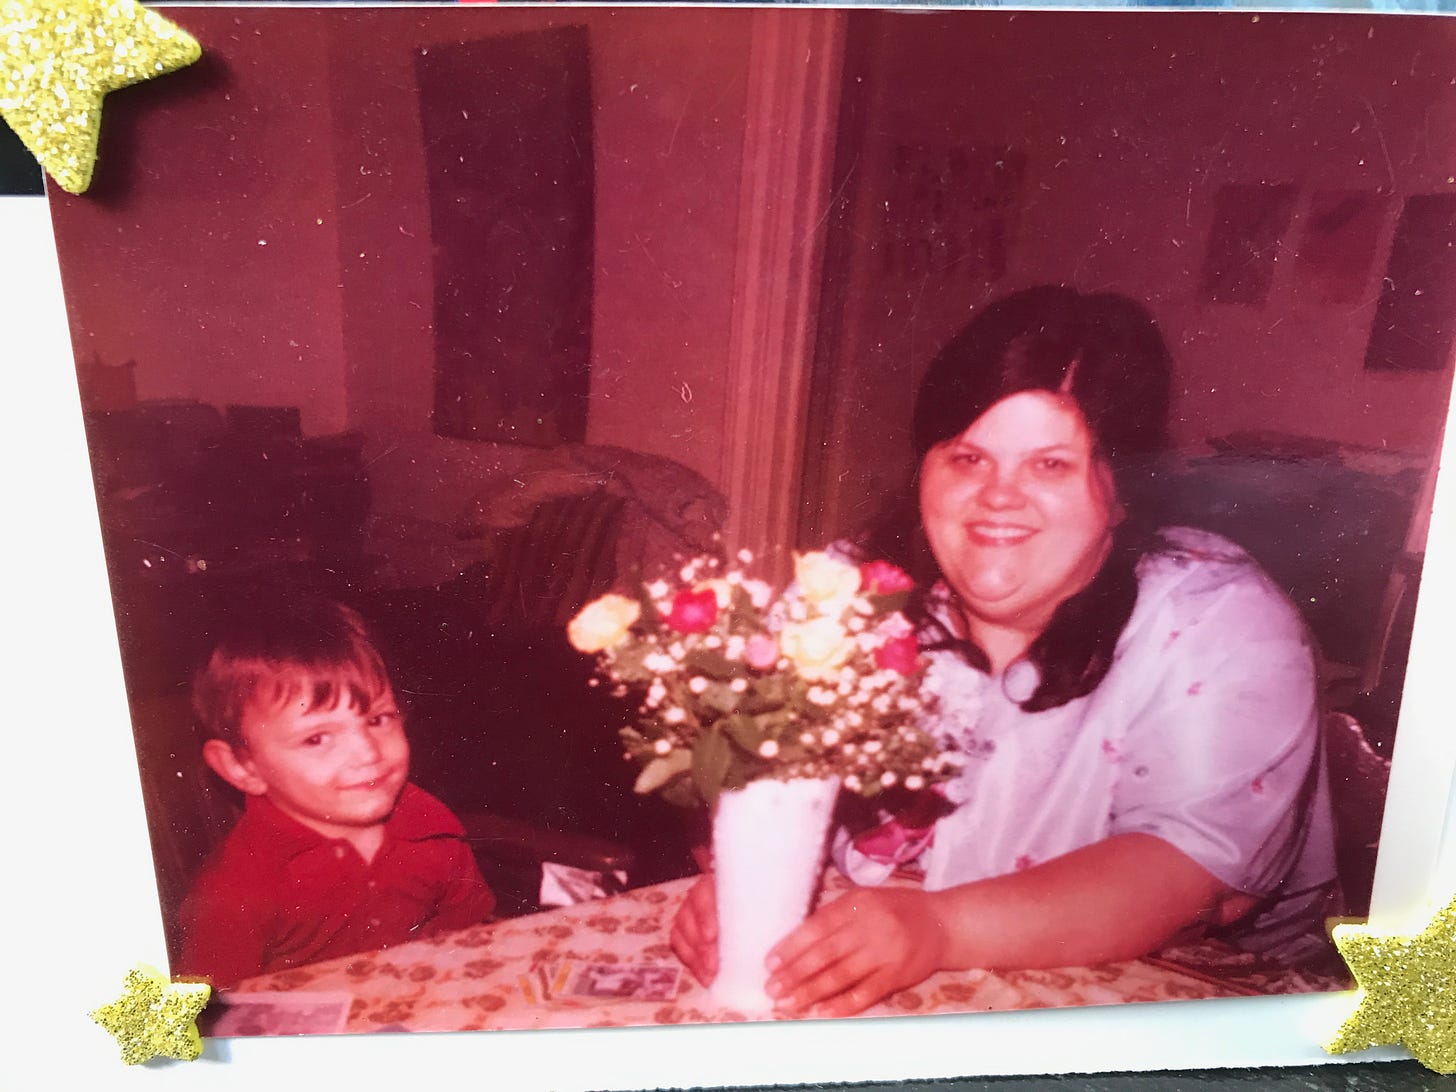 A smiling, dark-haired woman and a smiling, blond little boy sit at a table in a New York apartment. The woman has her hands around the base of a vase holding a bouquet of flowers.